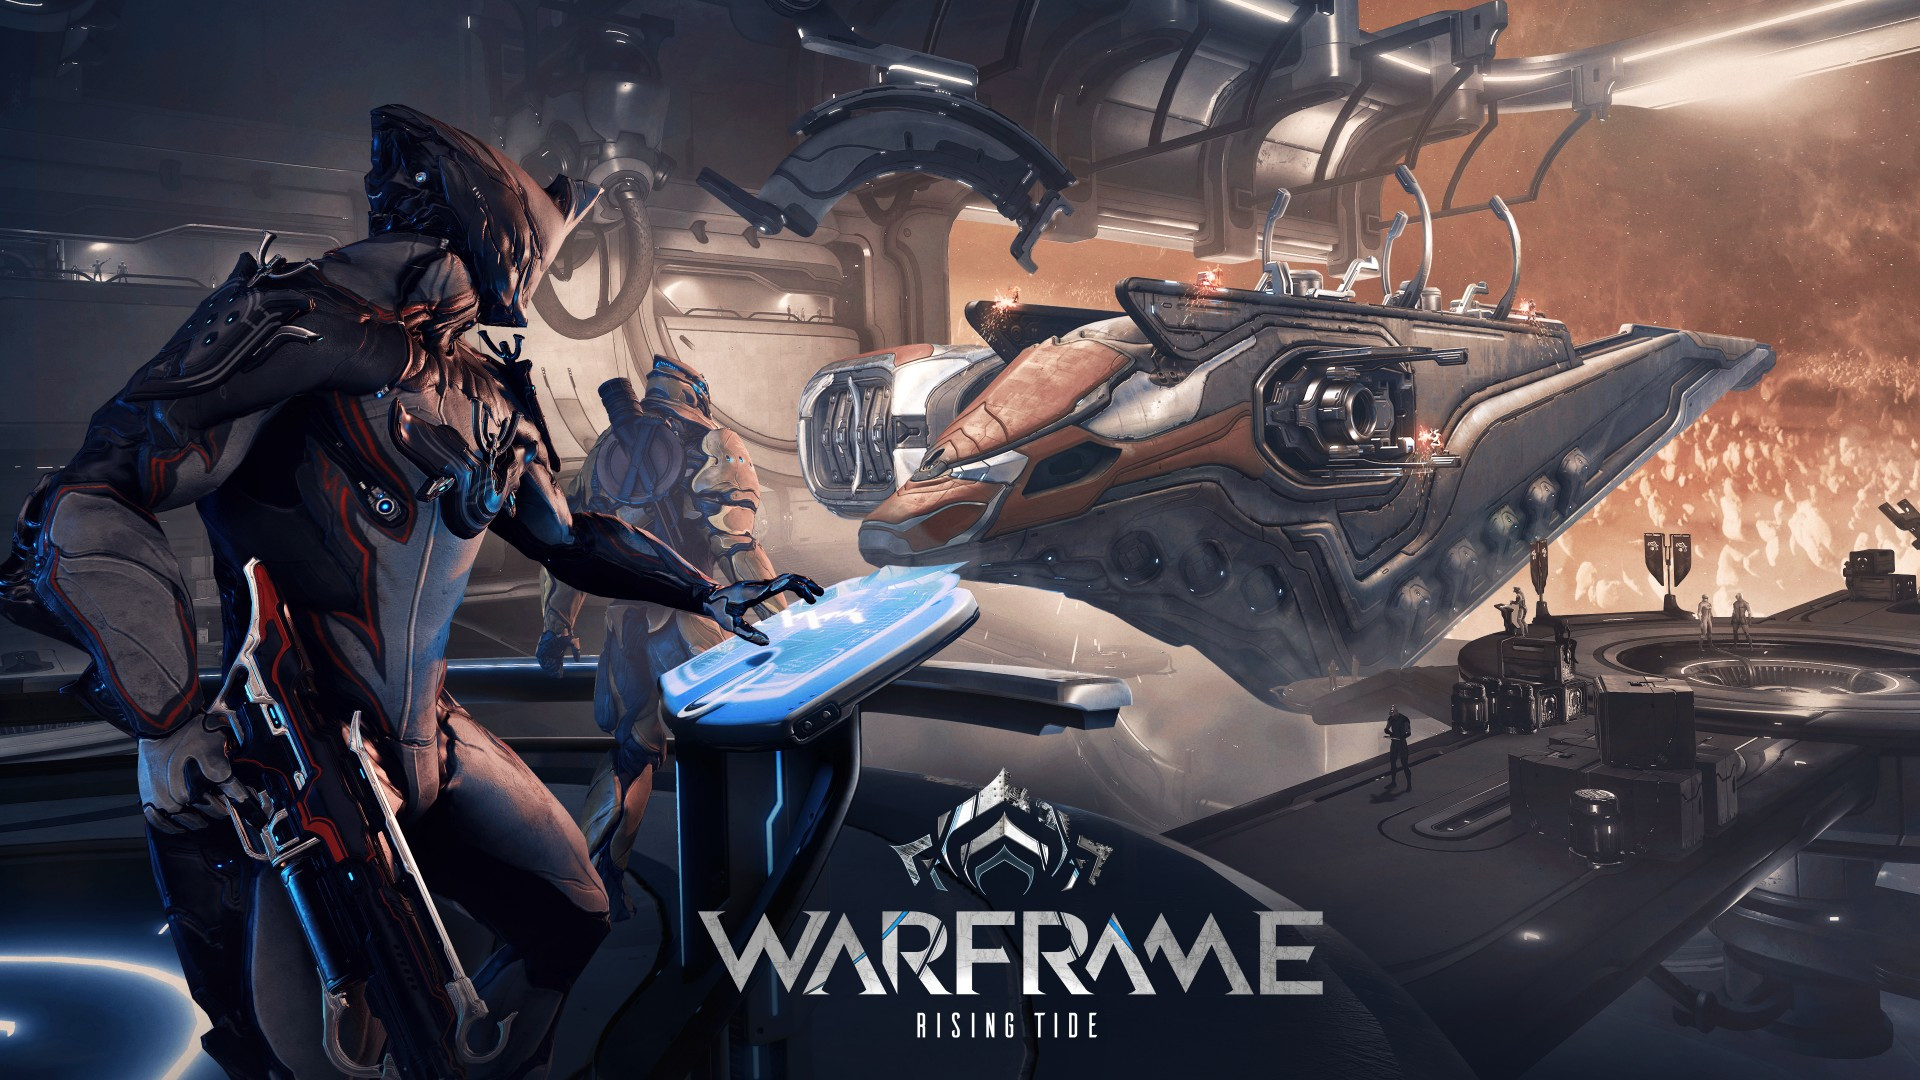 Warframe Brings Rising Tide to Xbox One Today